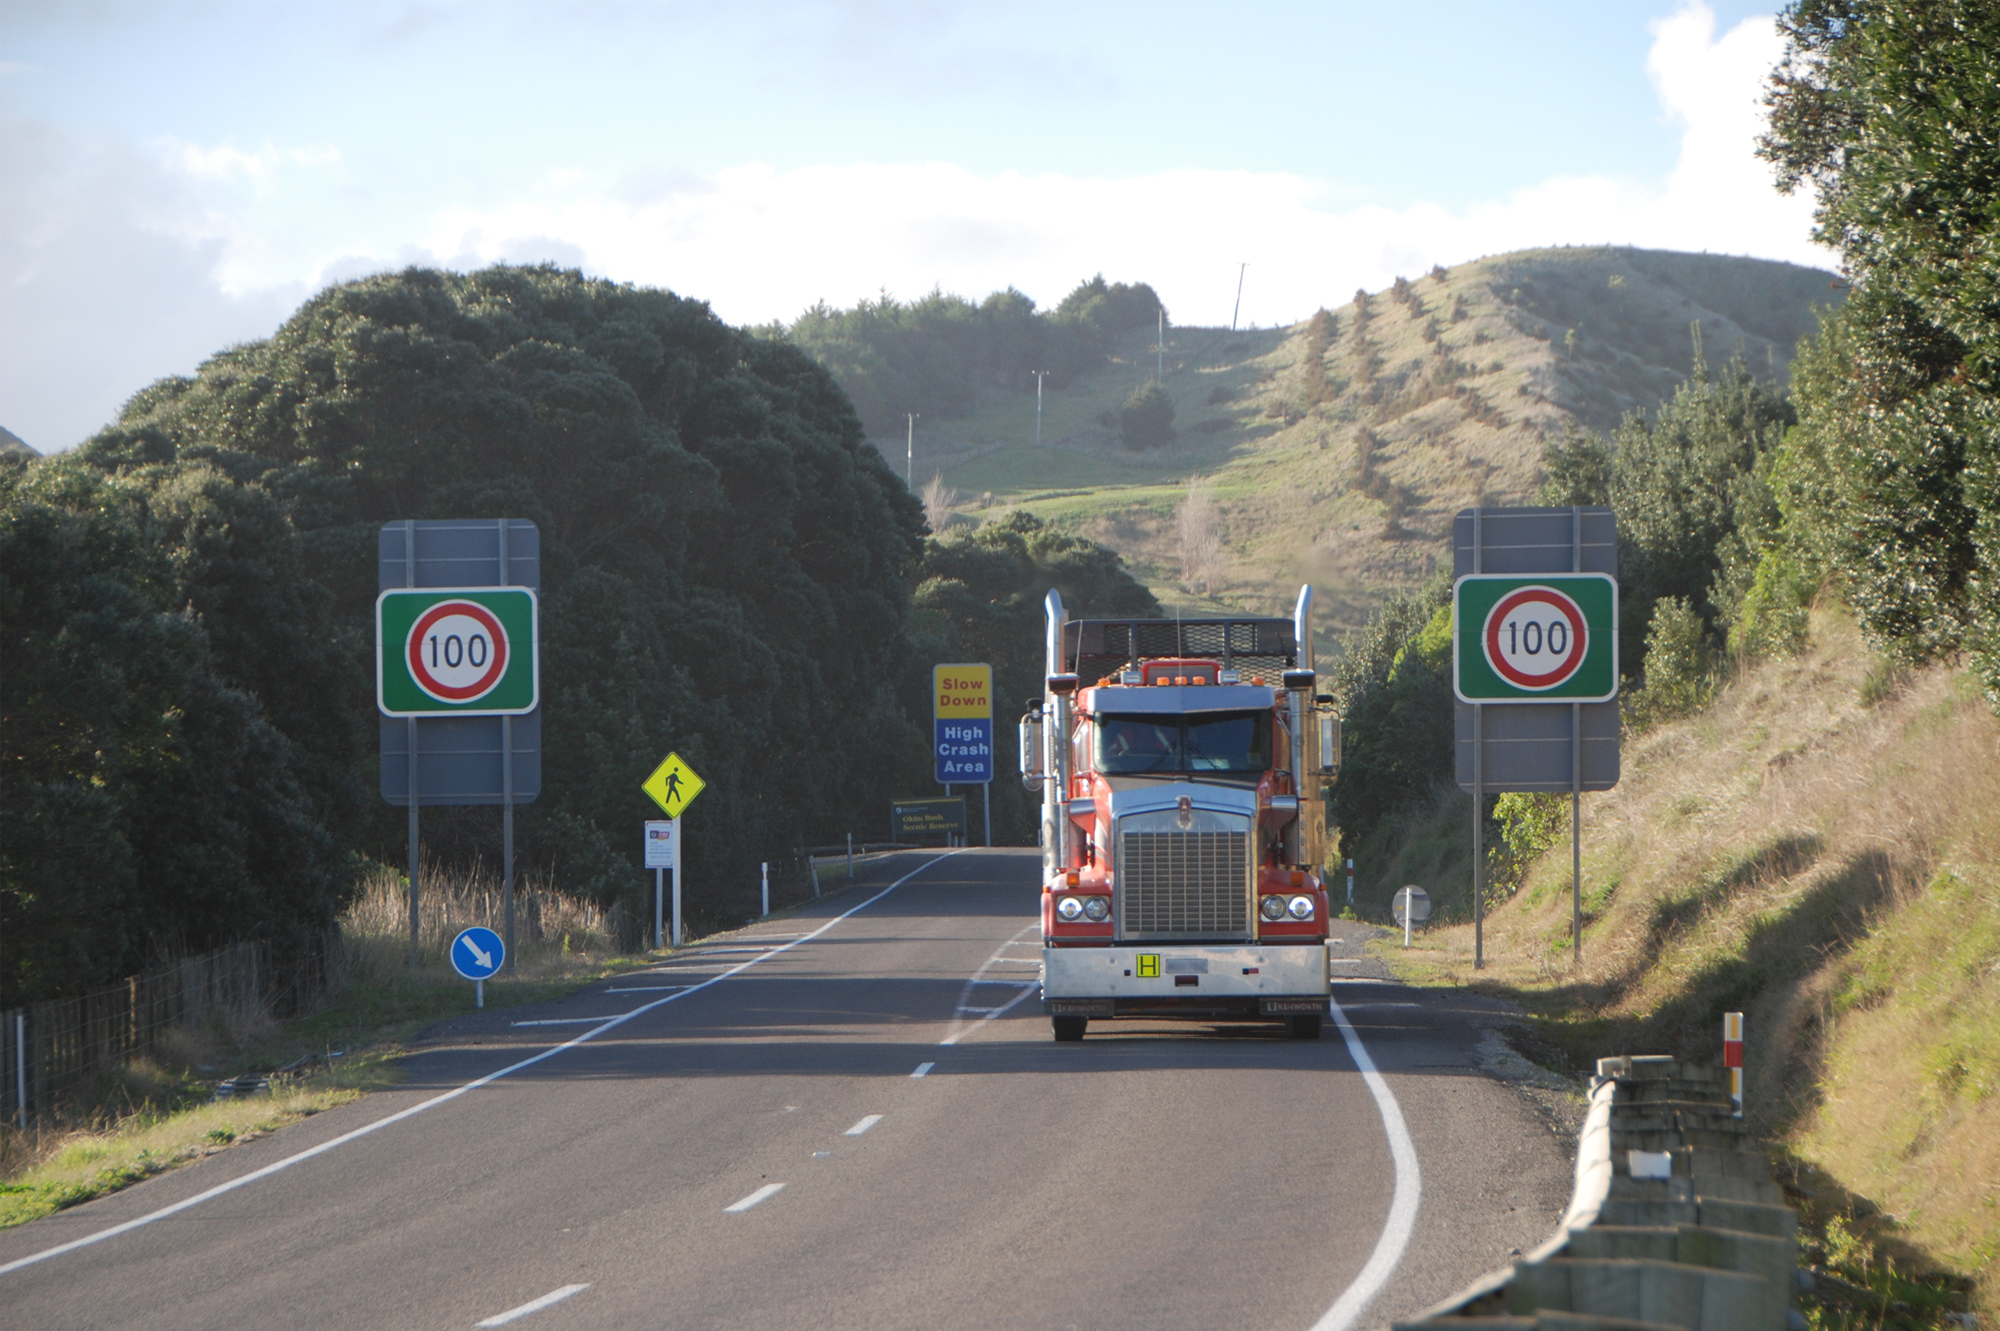 View of a truck coming towards the camera on a rural road with no passing lanes.